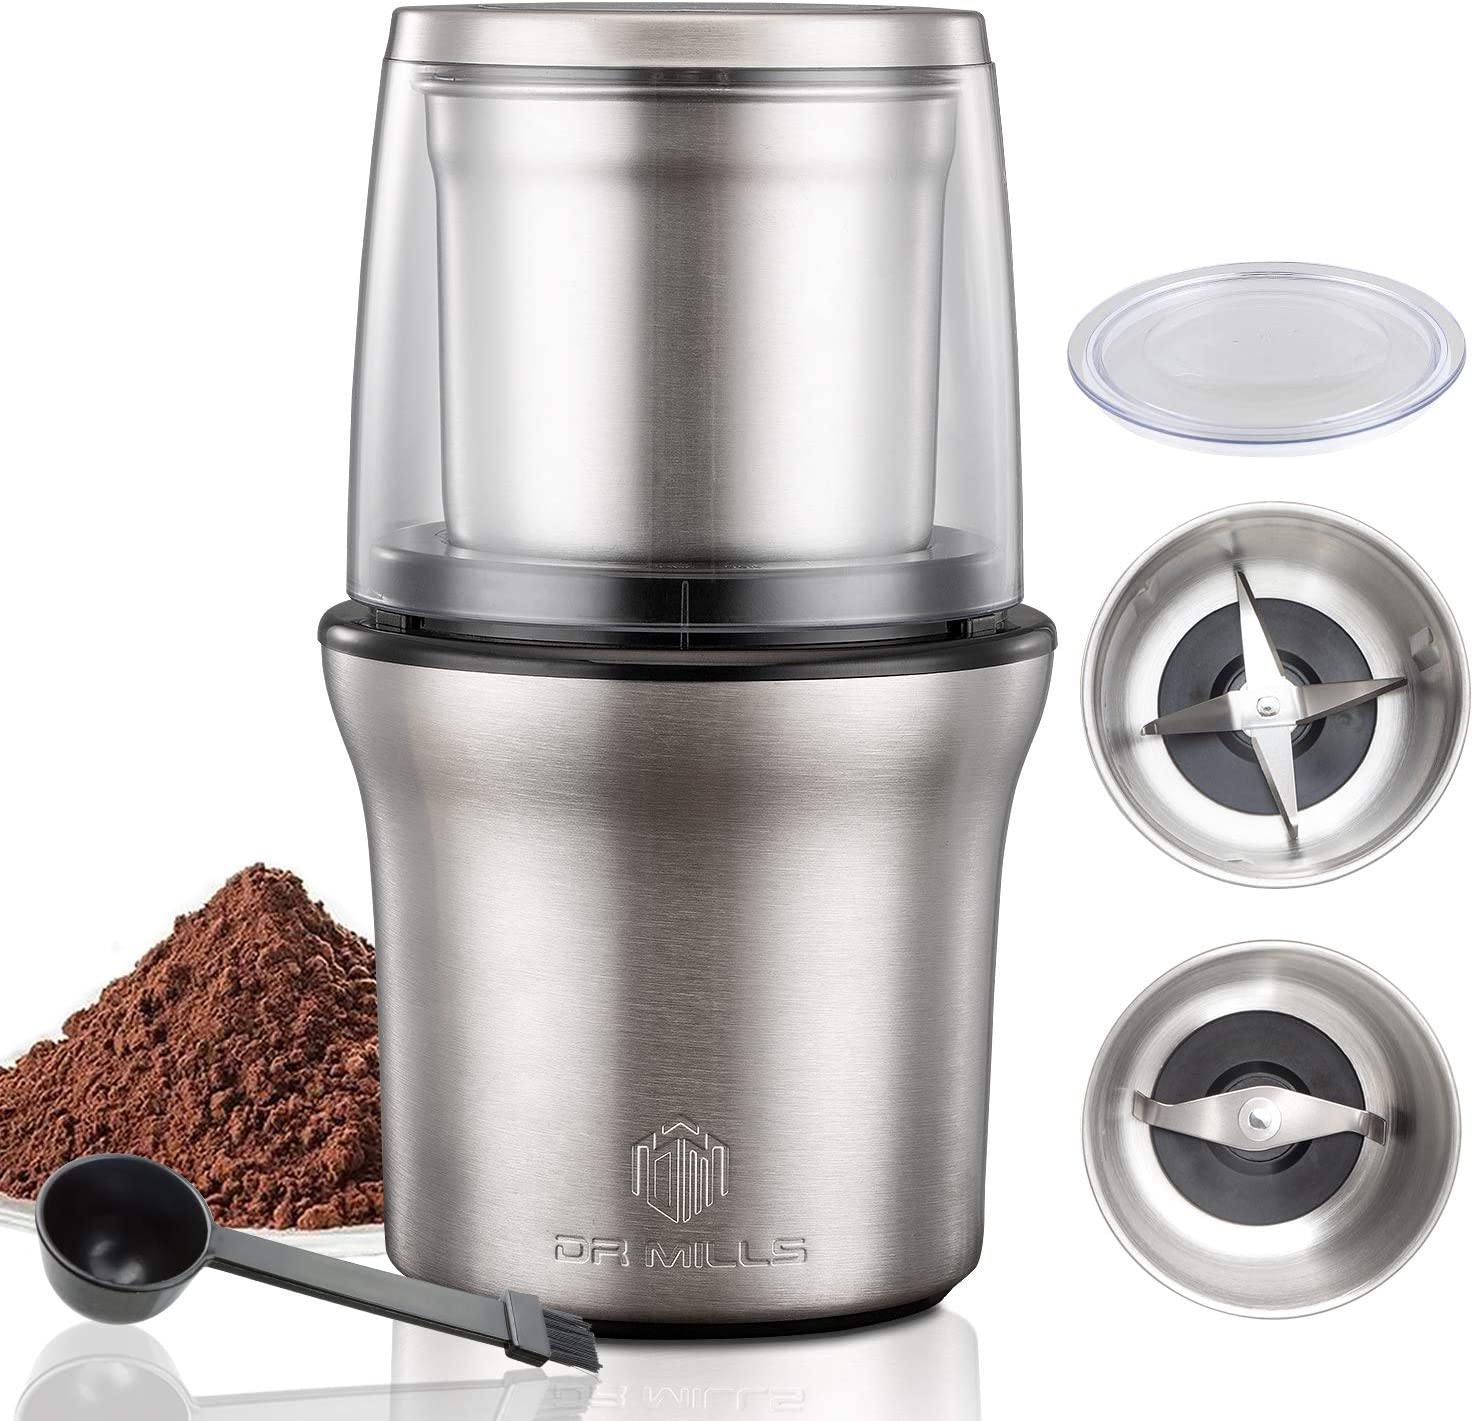 DR MILLS DM-7412M electric spice and coffee grinder, mill and chopper knife, removable cup, wash-free knife and wash-free cup are made of SUS304 stainless steel